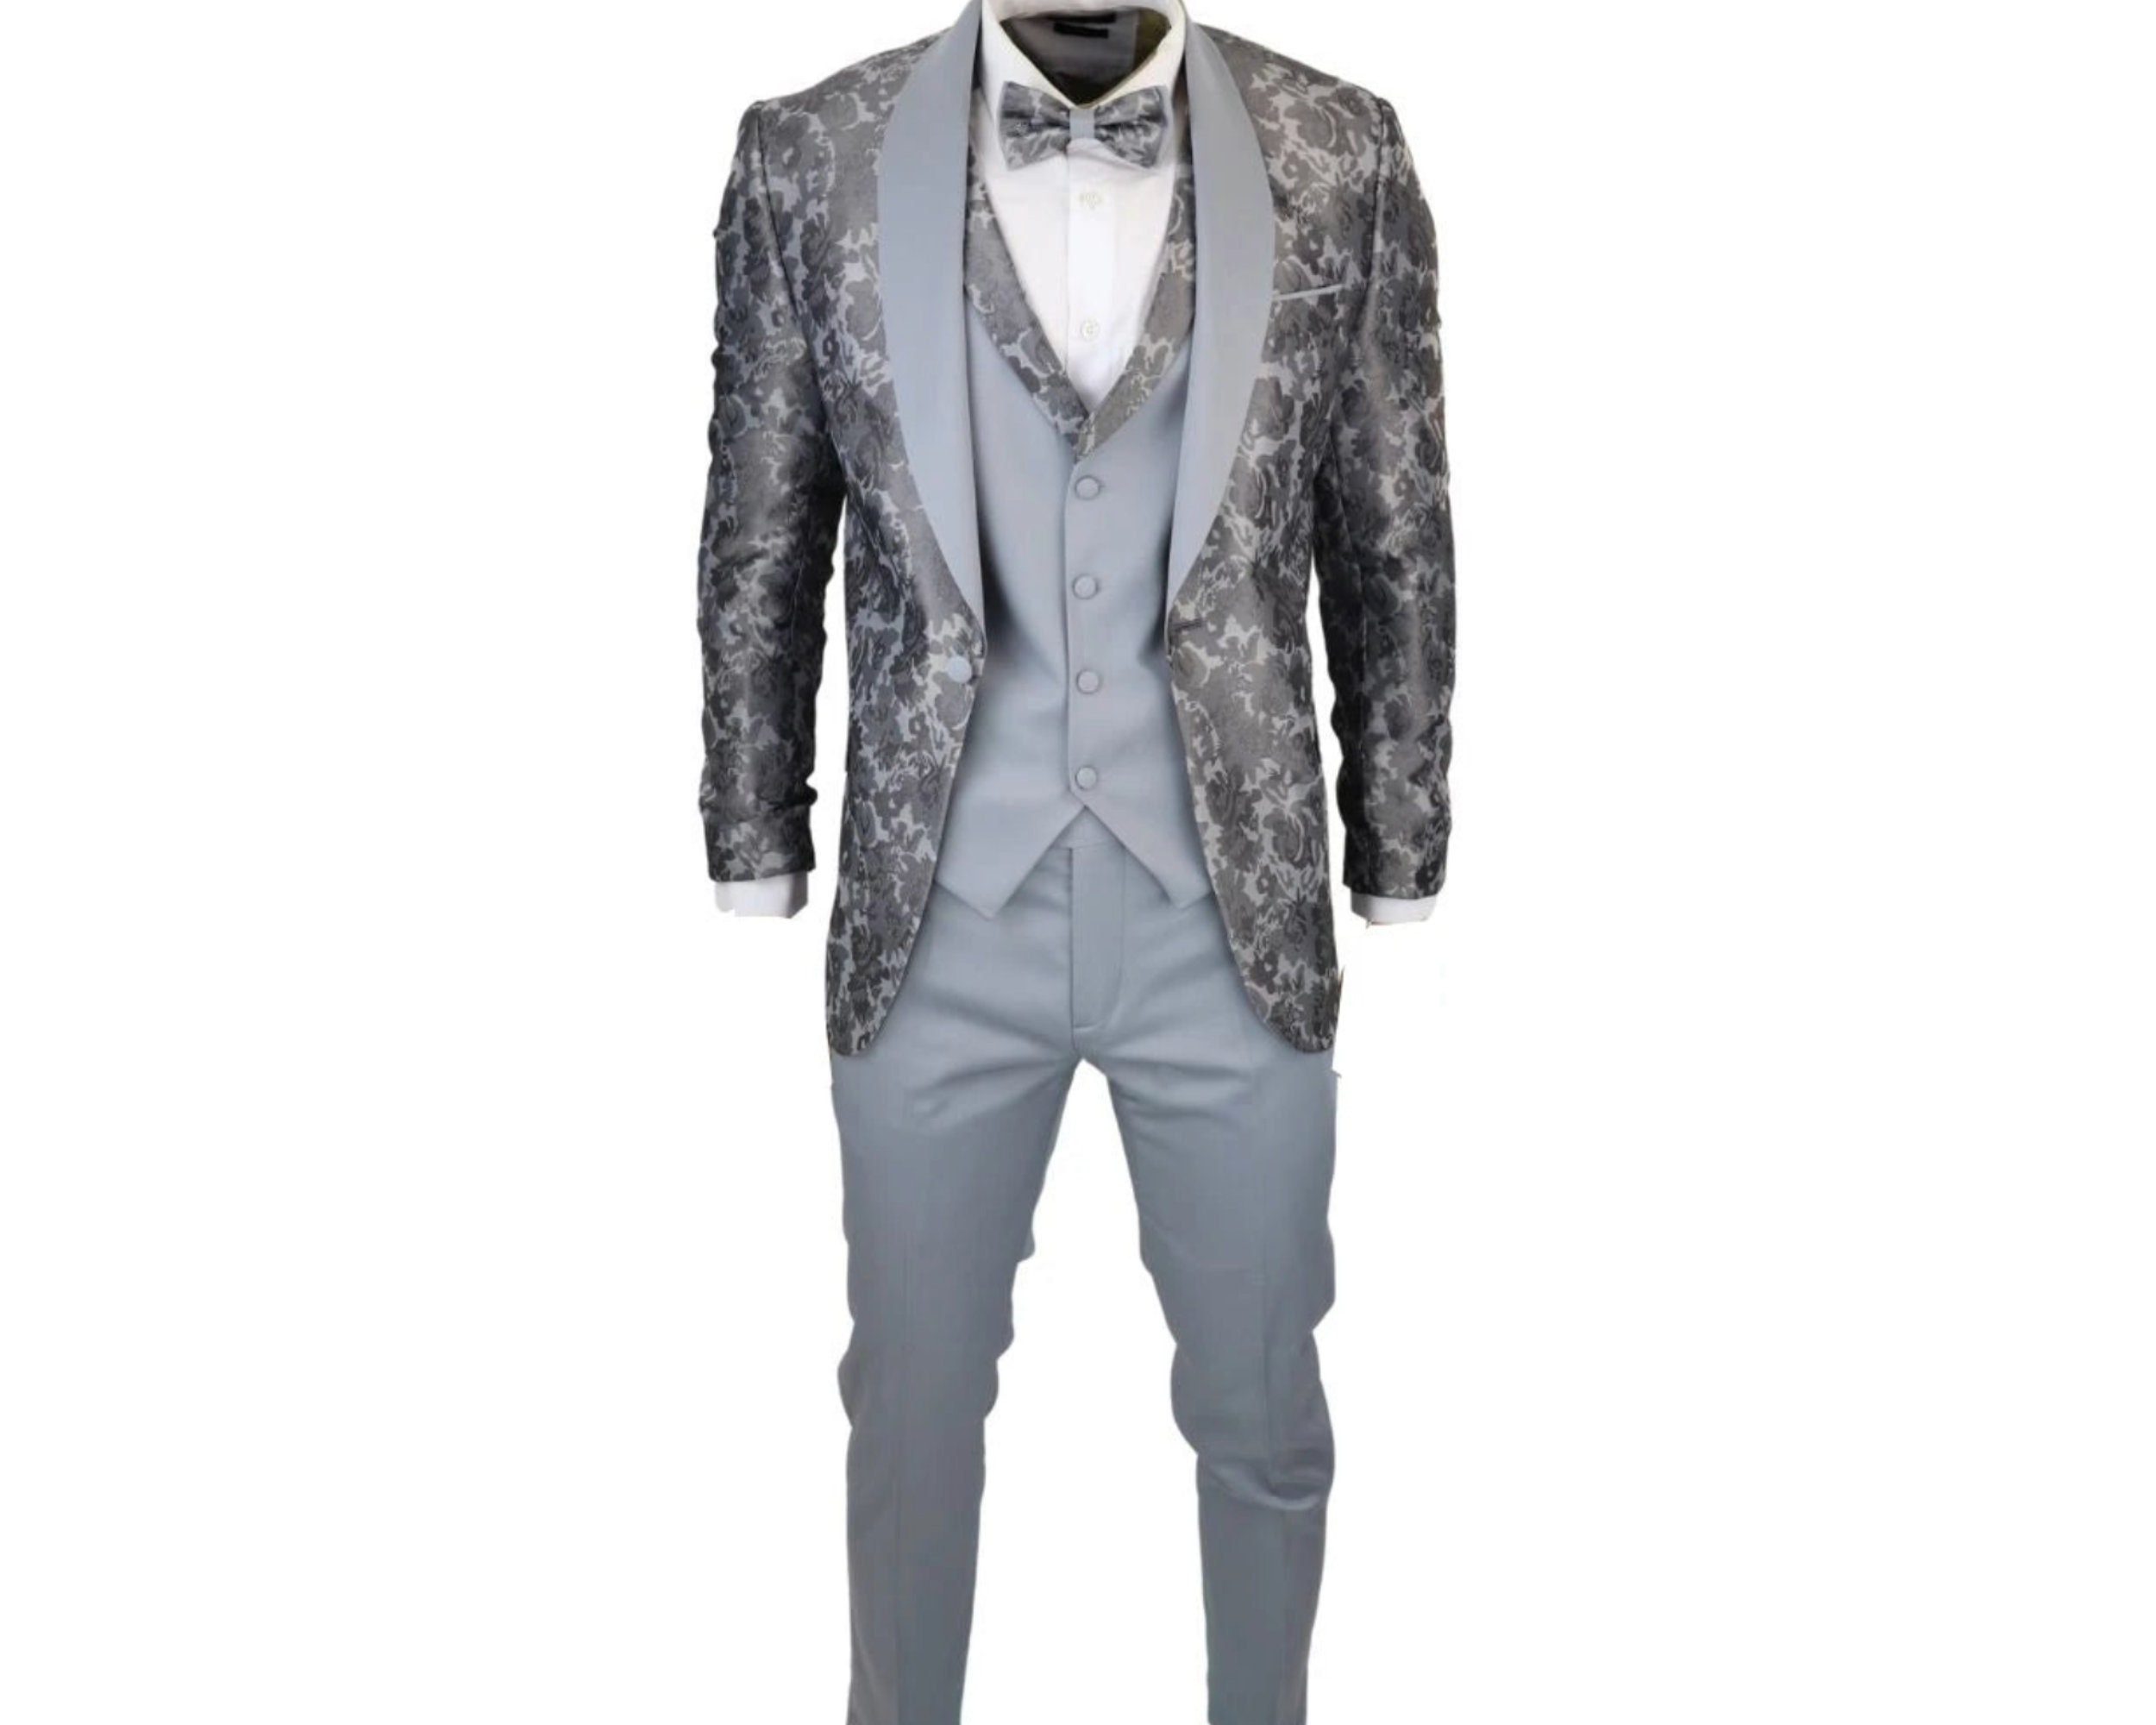 Men's Grey 2 Piece Business Suit Slim Fit Double Breasted Dinner